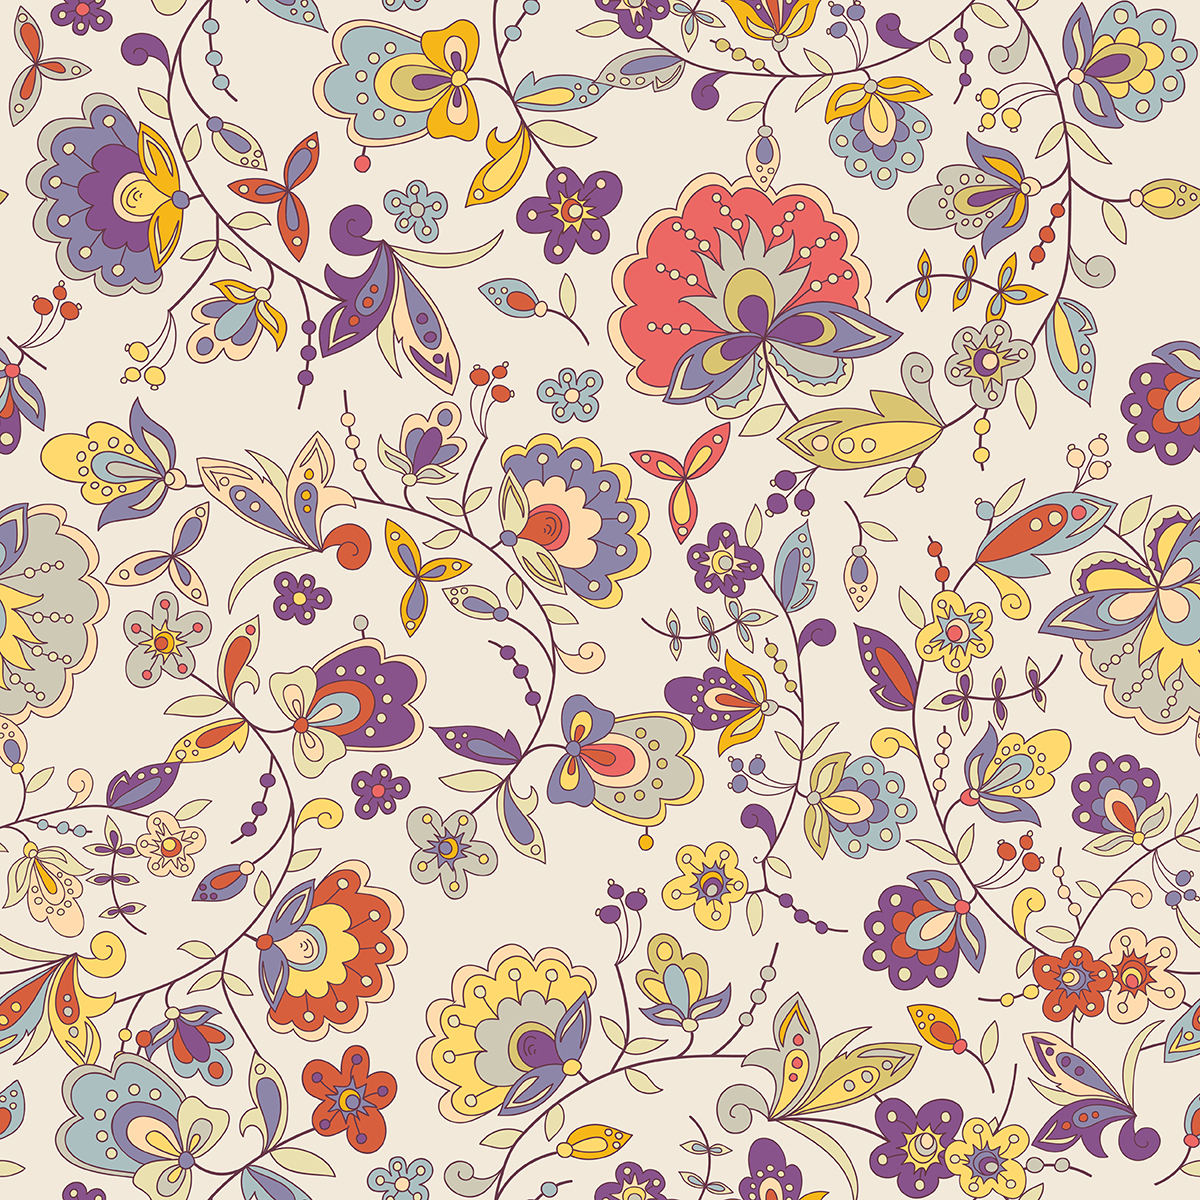 A colorful floral pattern on a white background